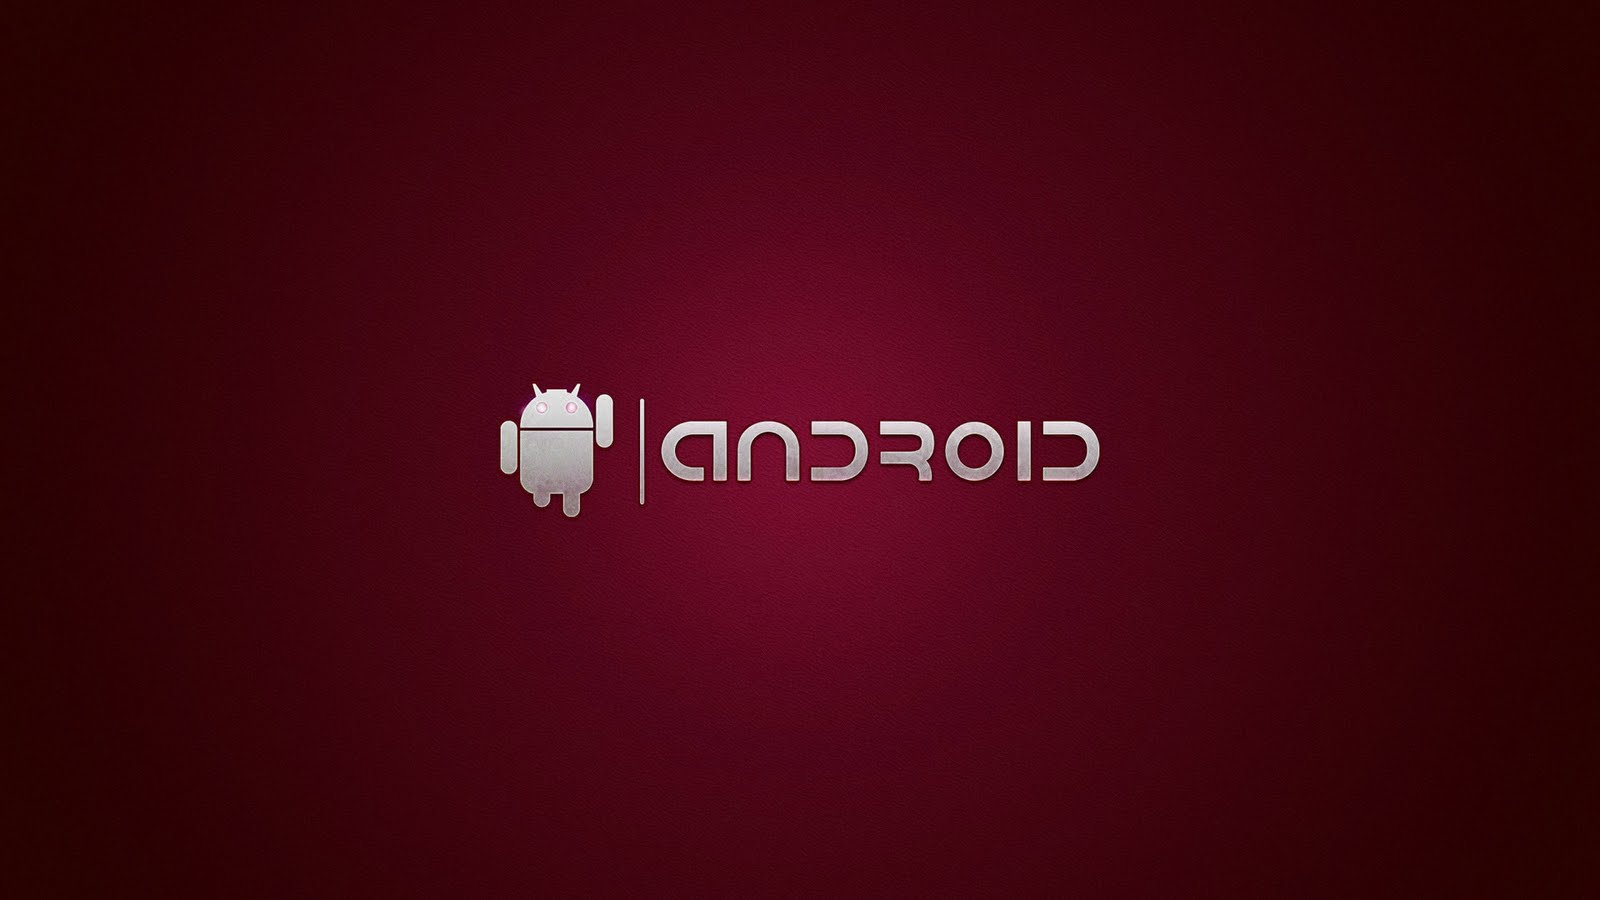 High Definition Android Wallpaper In HD For